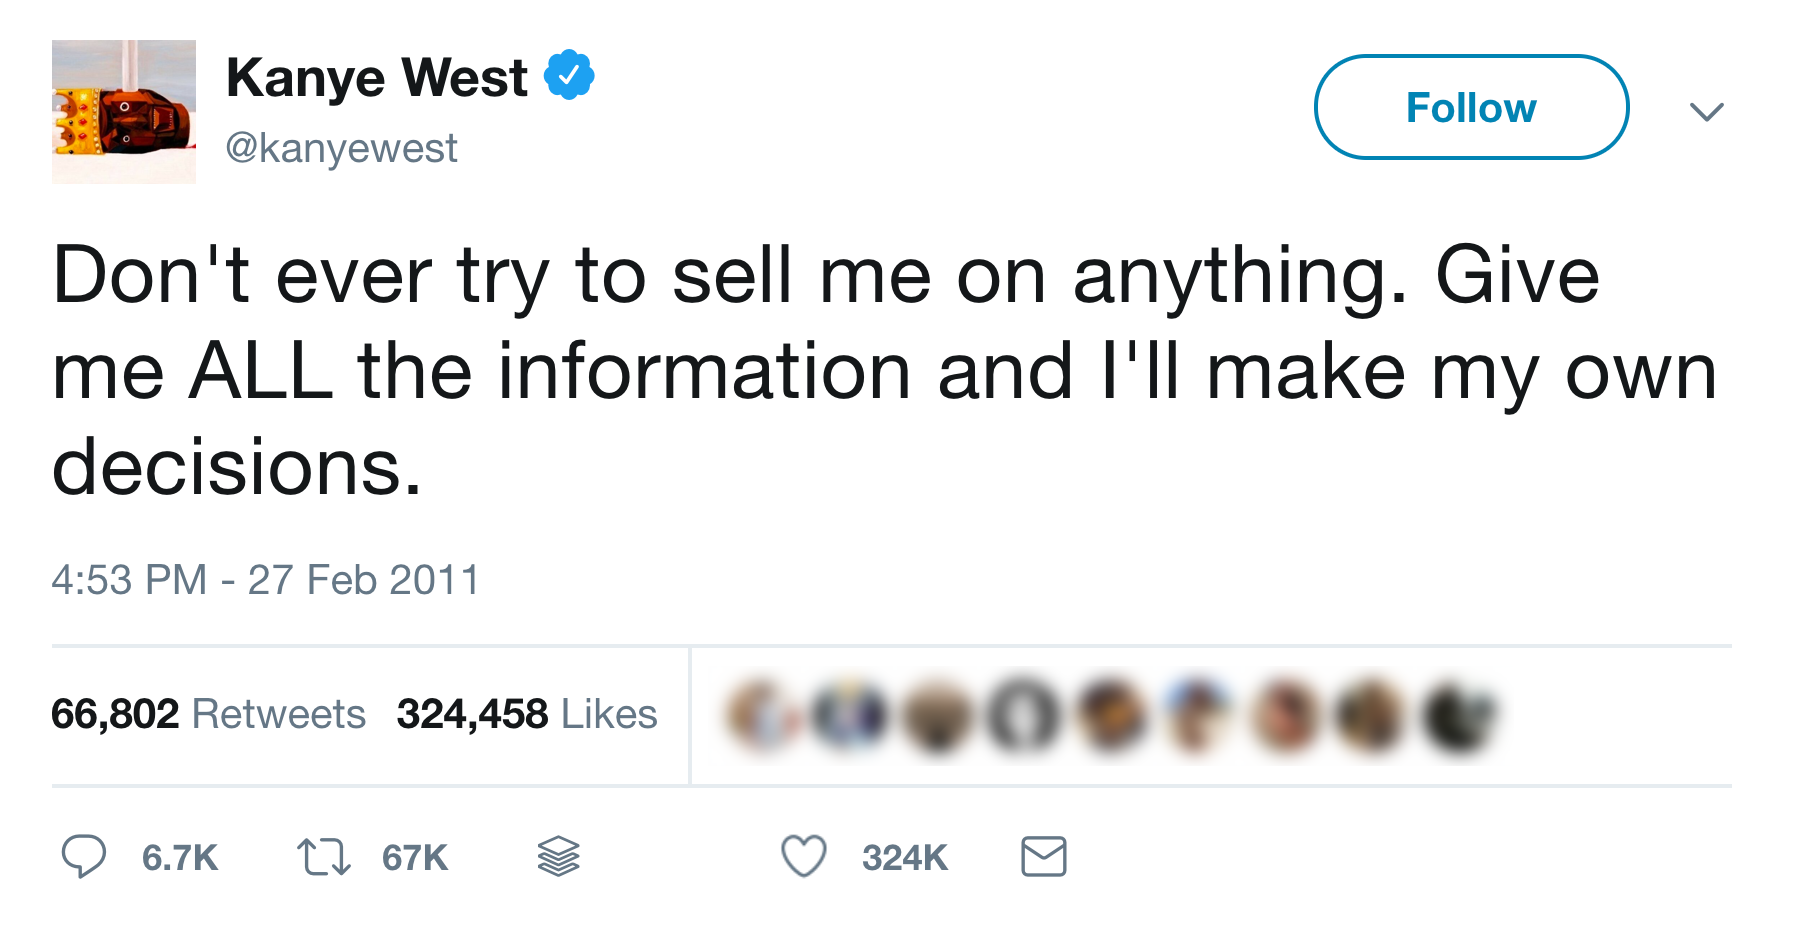 Kanye West tweet: "Don't ever try to sell me on anything. Give me ALL the information and I'll make my own decisions."